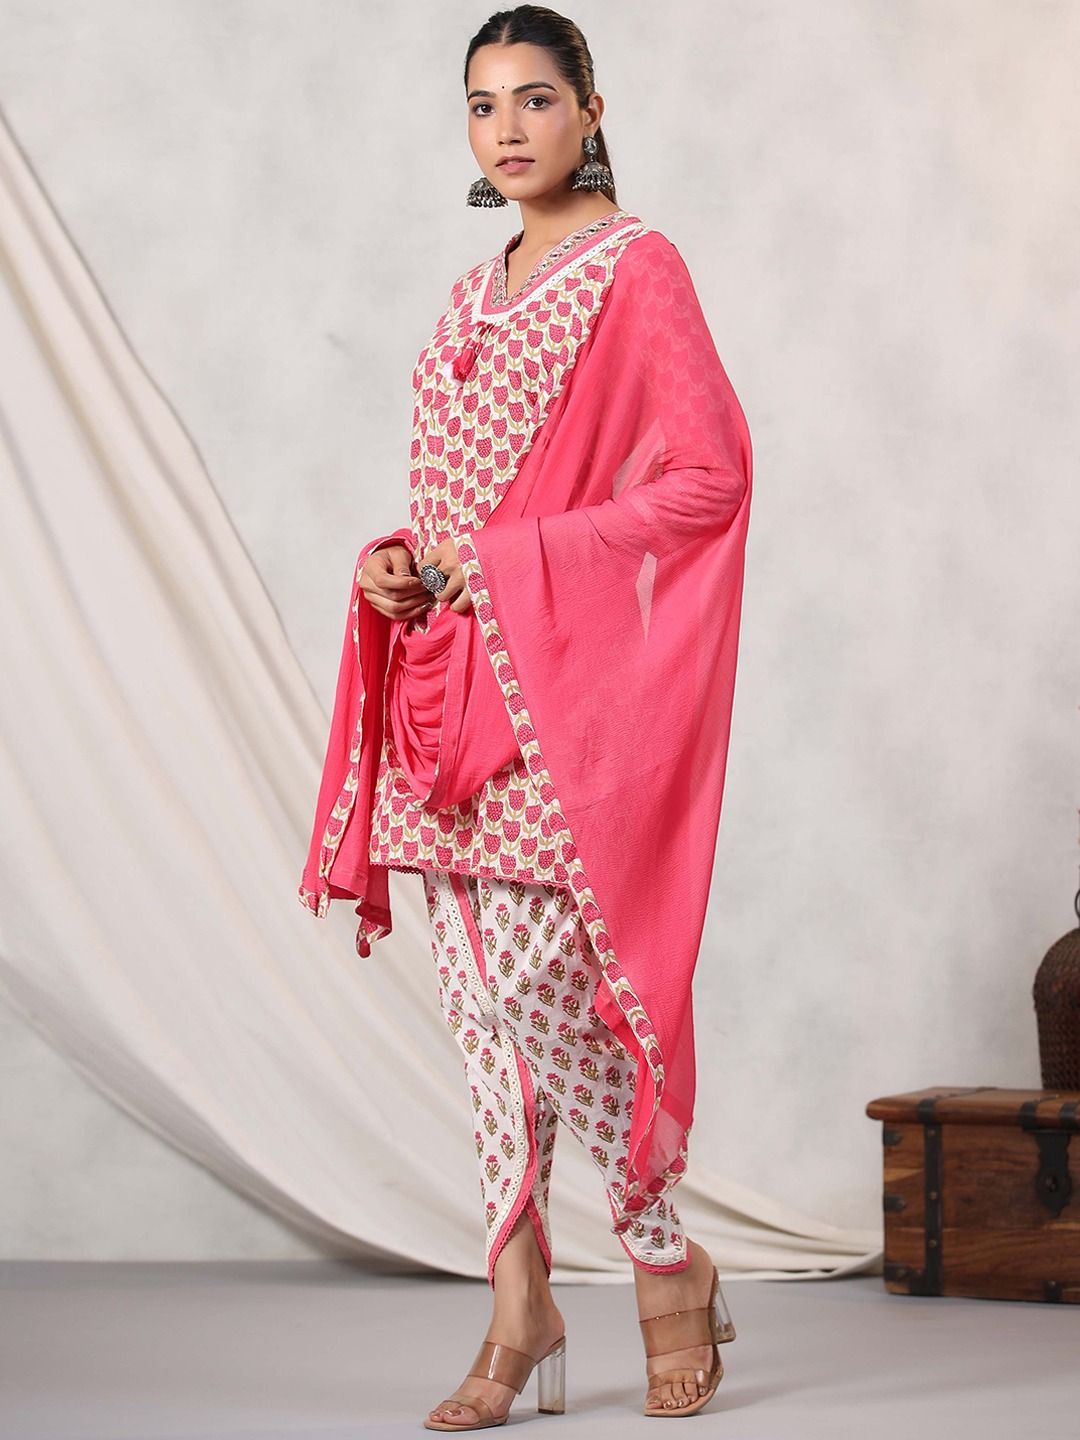 A Line Style Cotton Fabric Pink Color Kurti And Bottom With Dupatta